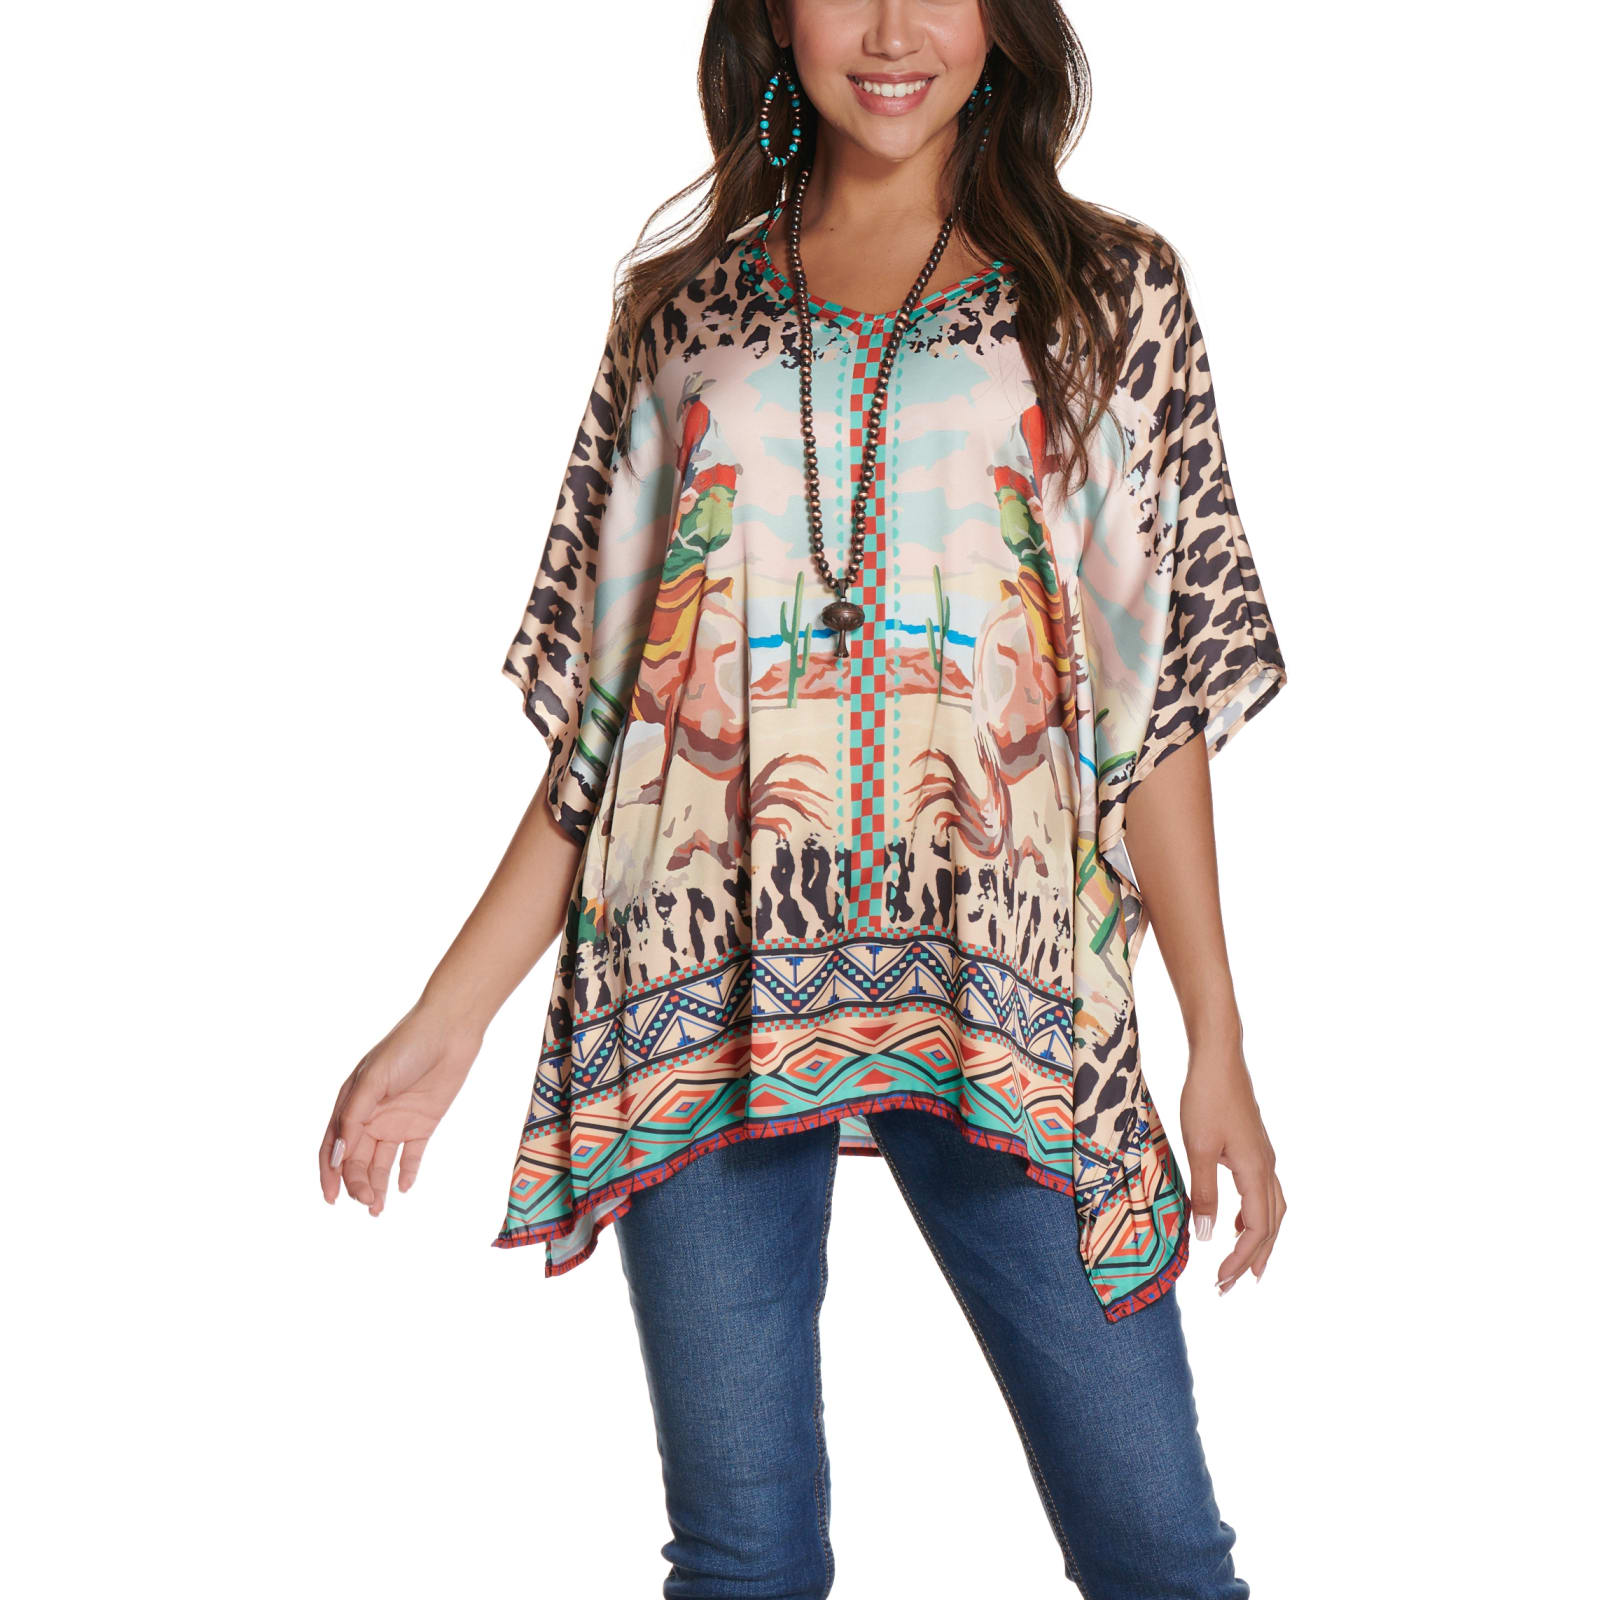 Fashion Express Women's Leopard Cowboy Poncho Top available at Cavenders